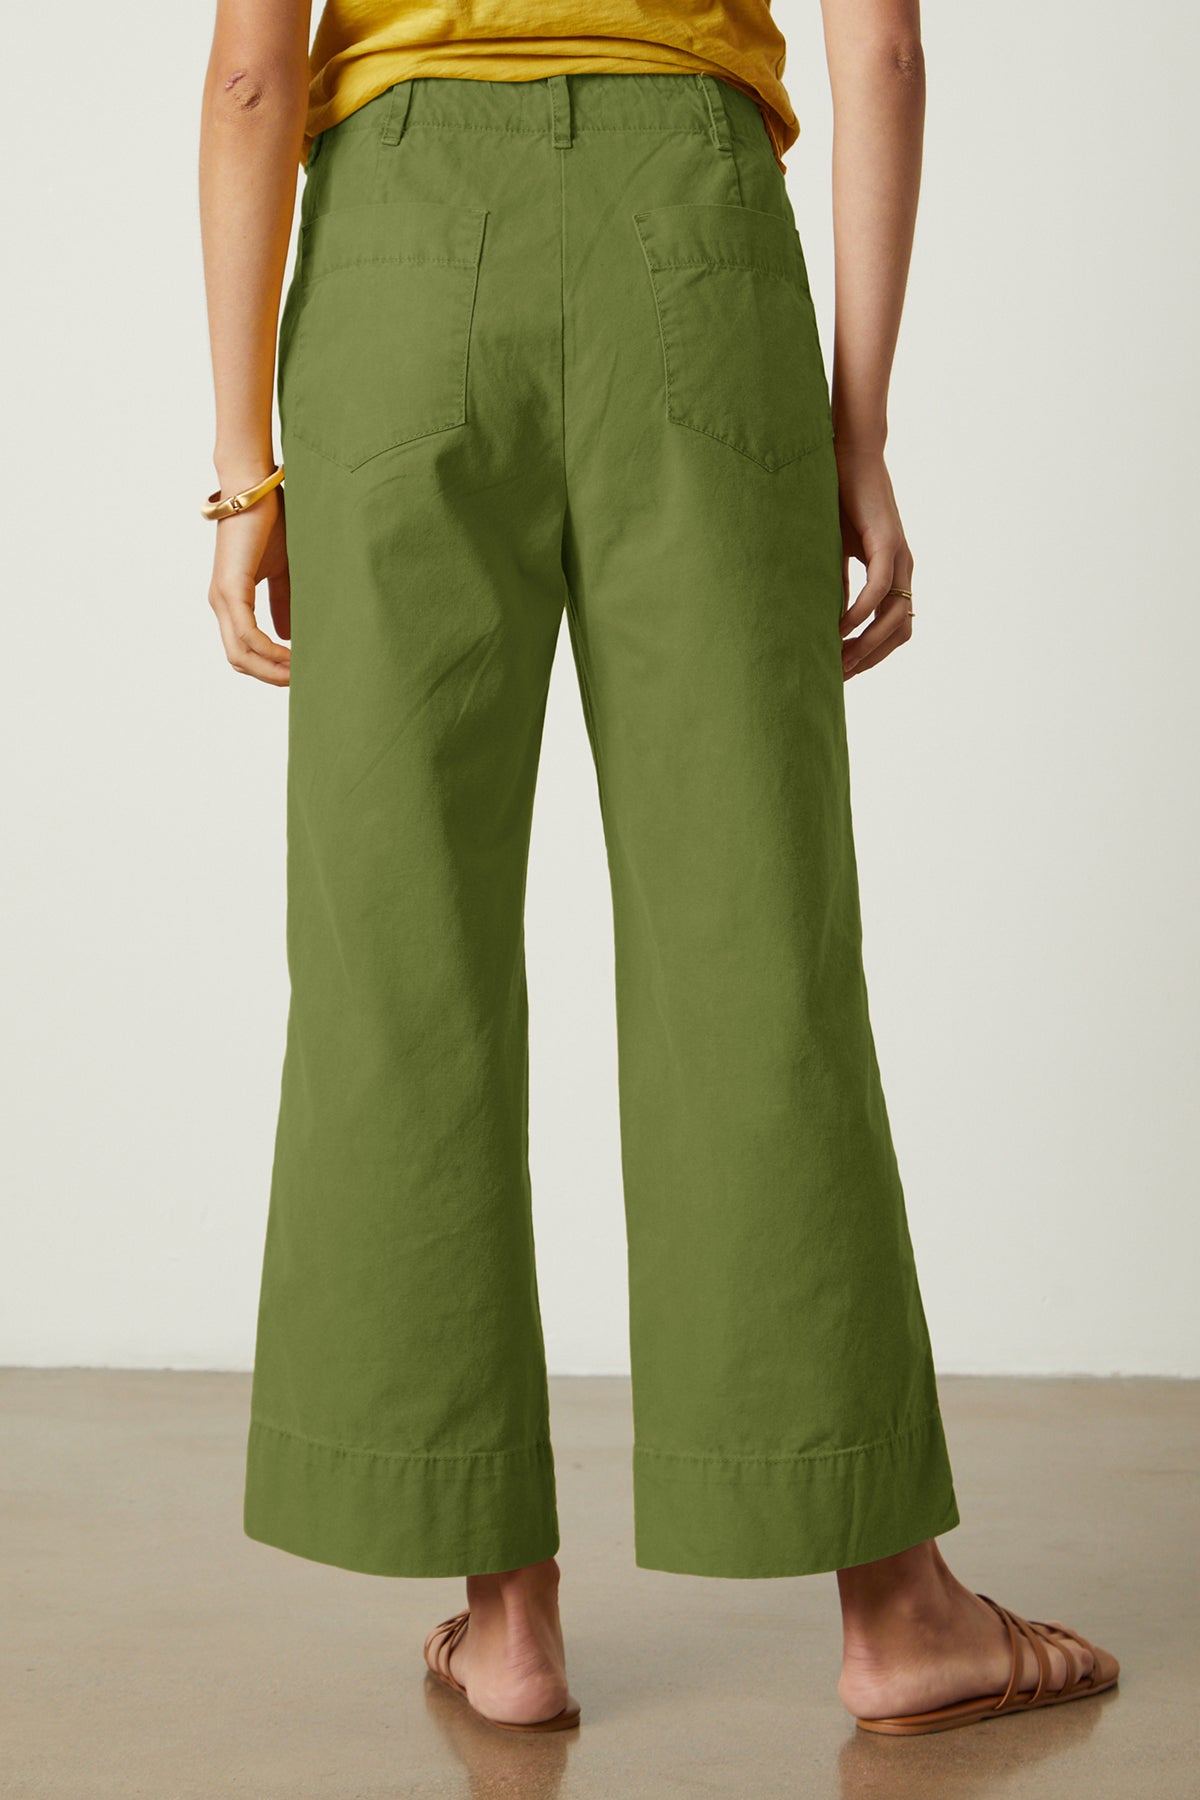   Mya Pant in soft army green color back 